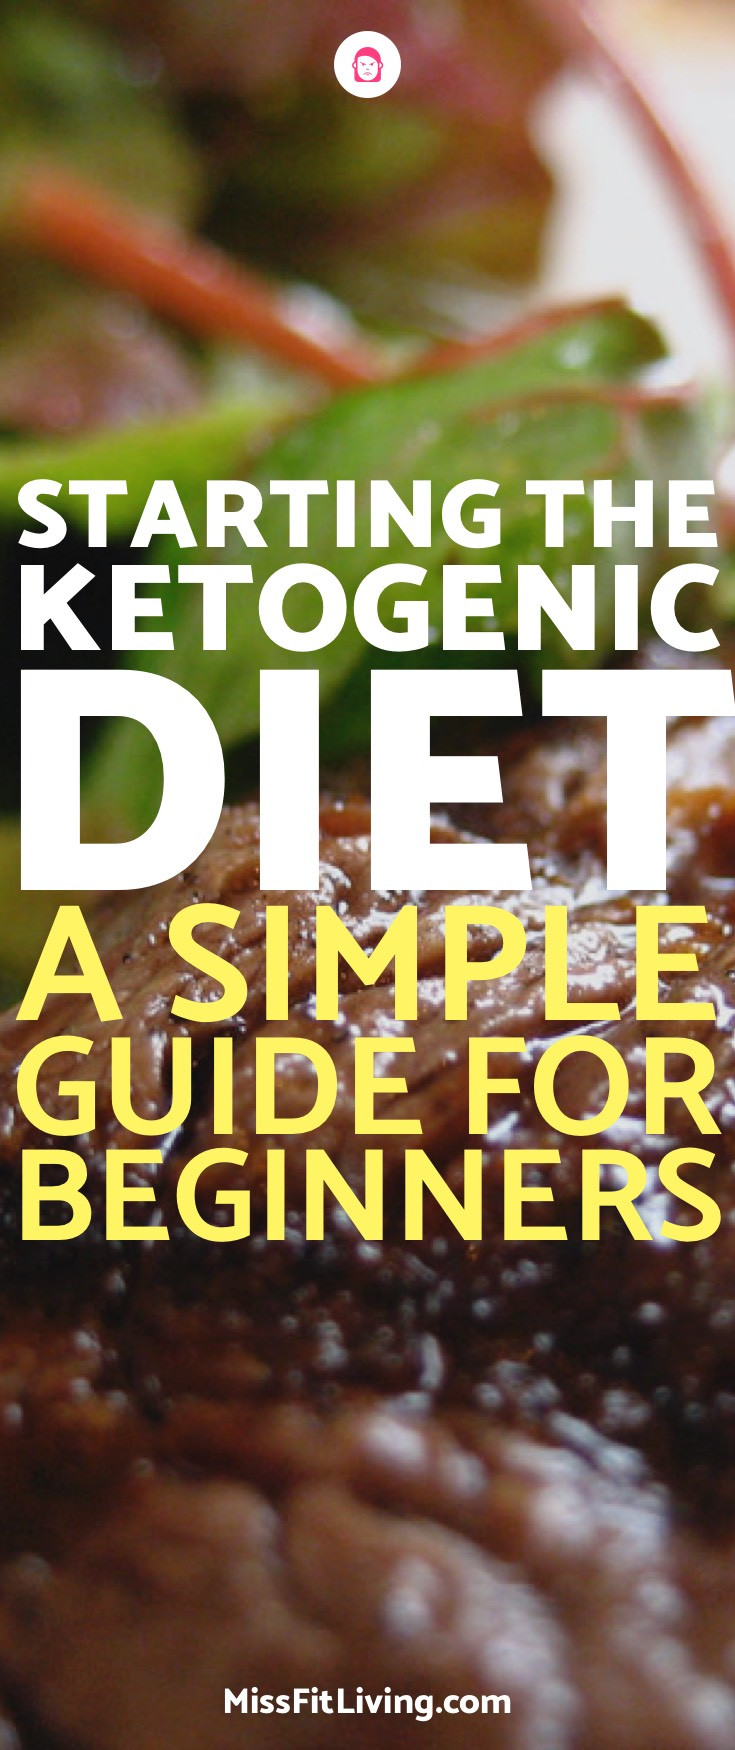 Starting Keto Diet
 Starting the Ketogenic Diet A Simple Guide for Beginners